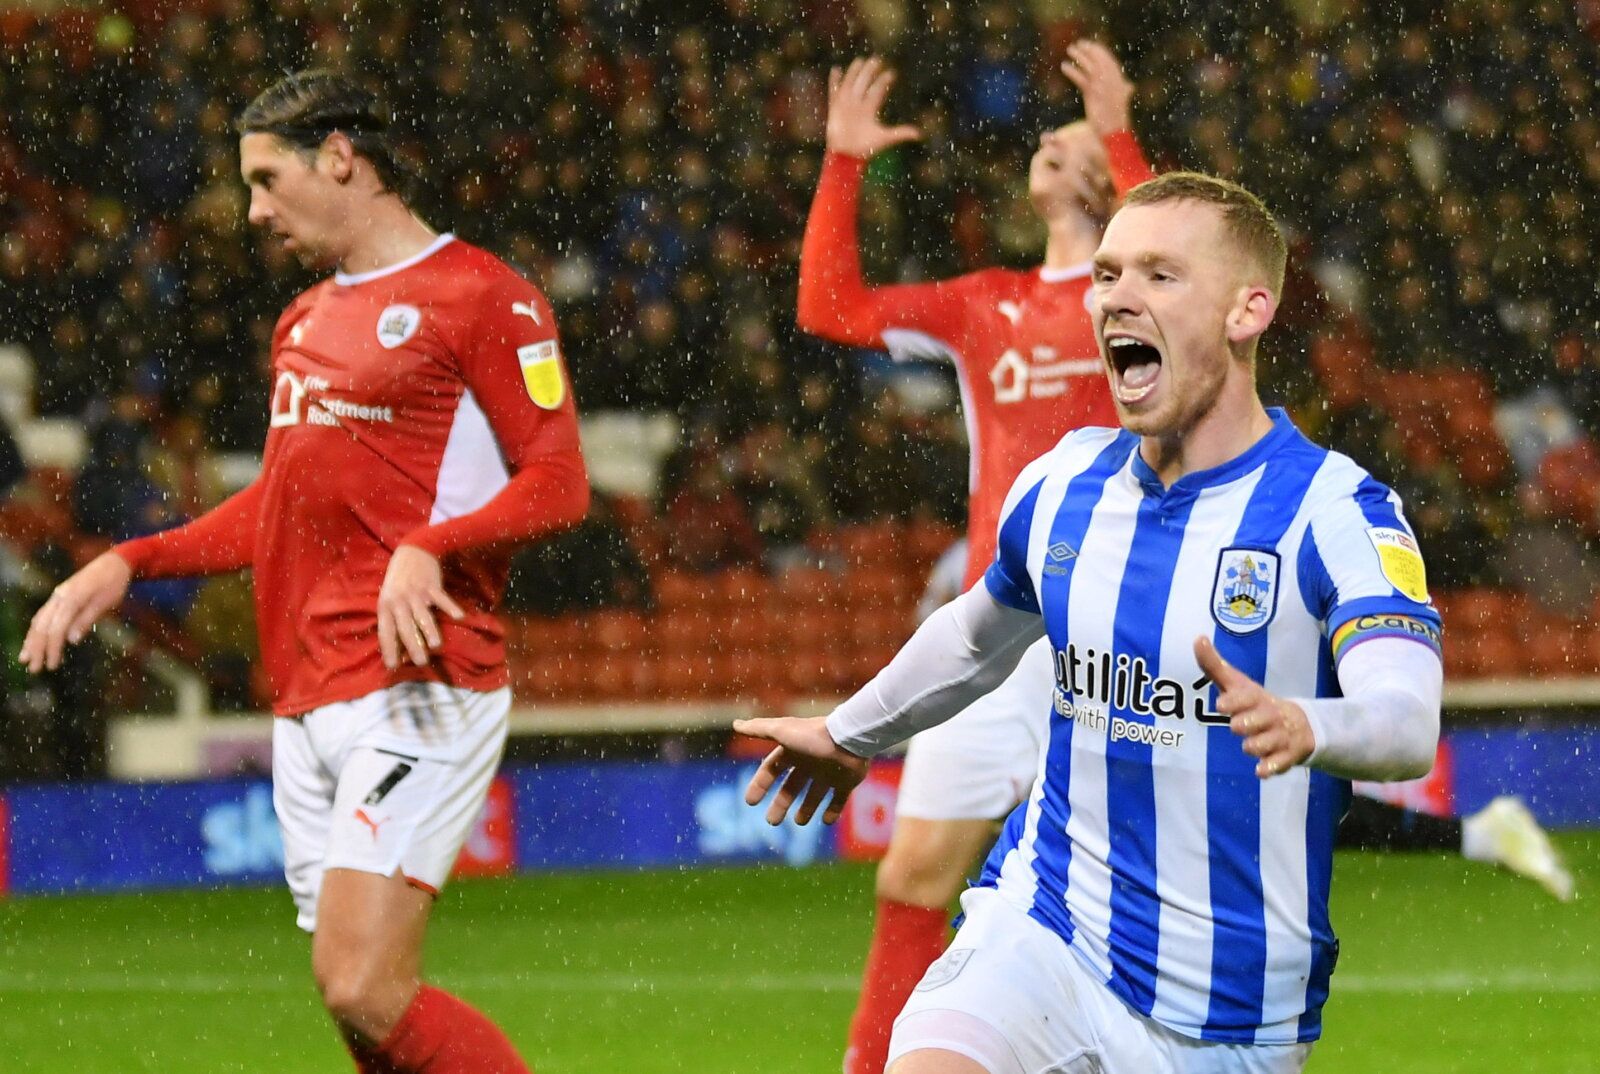 Soccer Football - Barnsley v Huddersfield Town - Oakwell, Barnsley, Britain - December 4, 2021  Huddersfield Town's Lewis O'Brien celebrates scoring their first goal   Action Images/Paul Burrows  EDITORIAL USE ONLY. No use with unauthorized audio, video, data, fixture lists, club/league logos or 